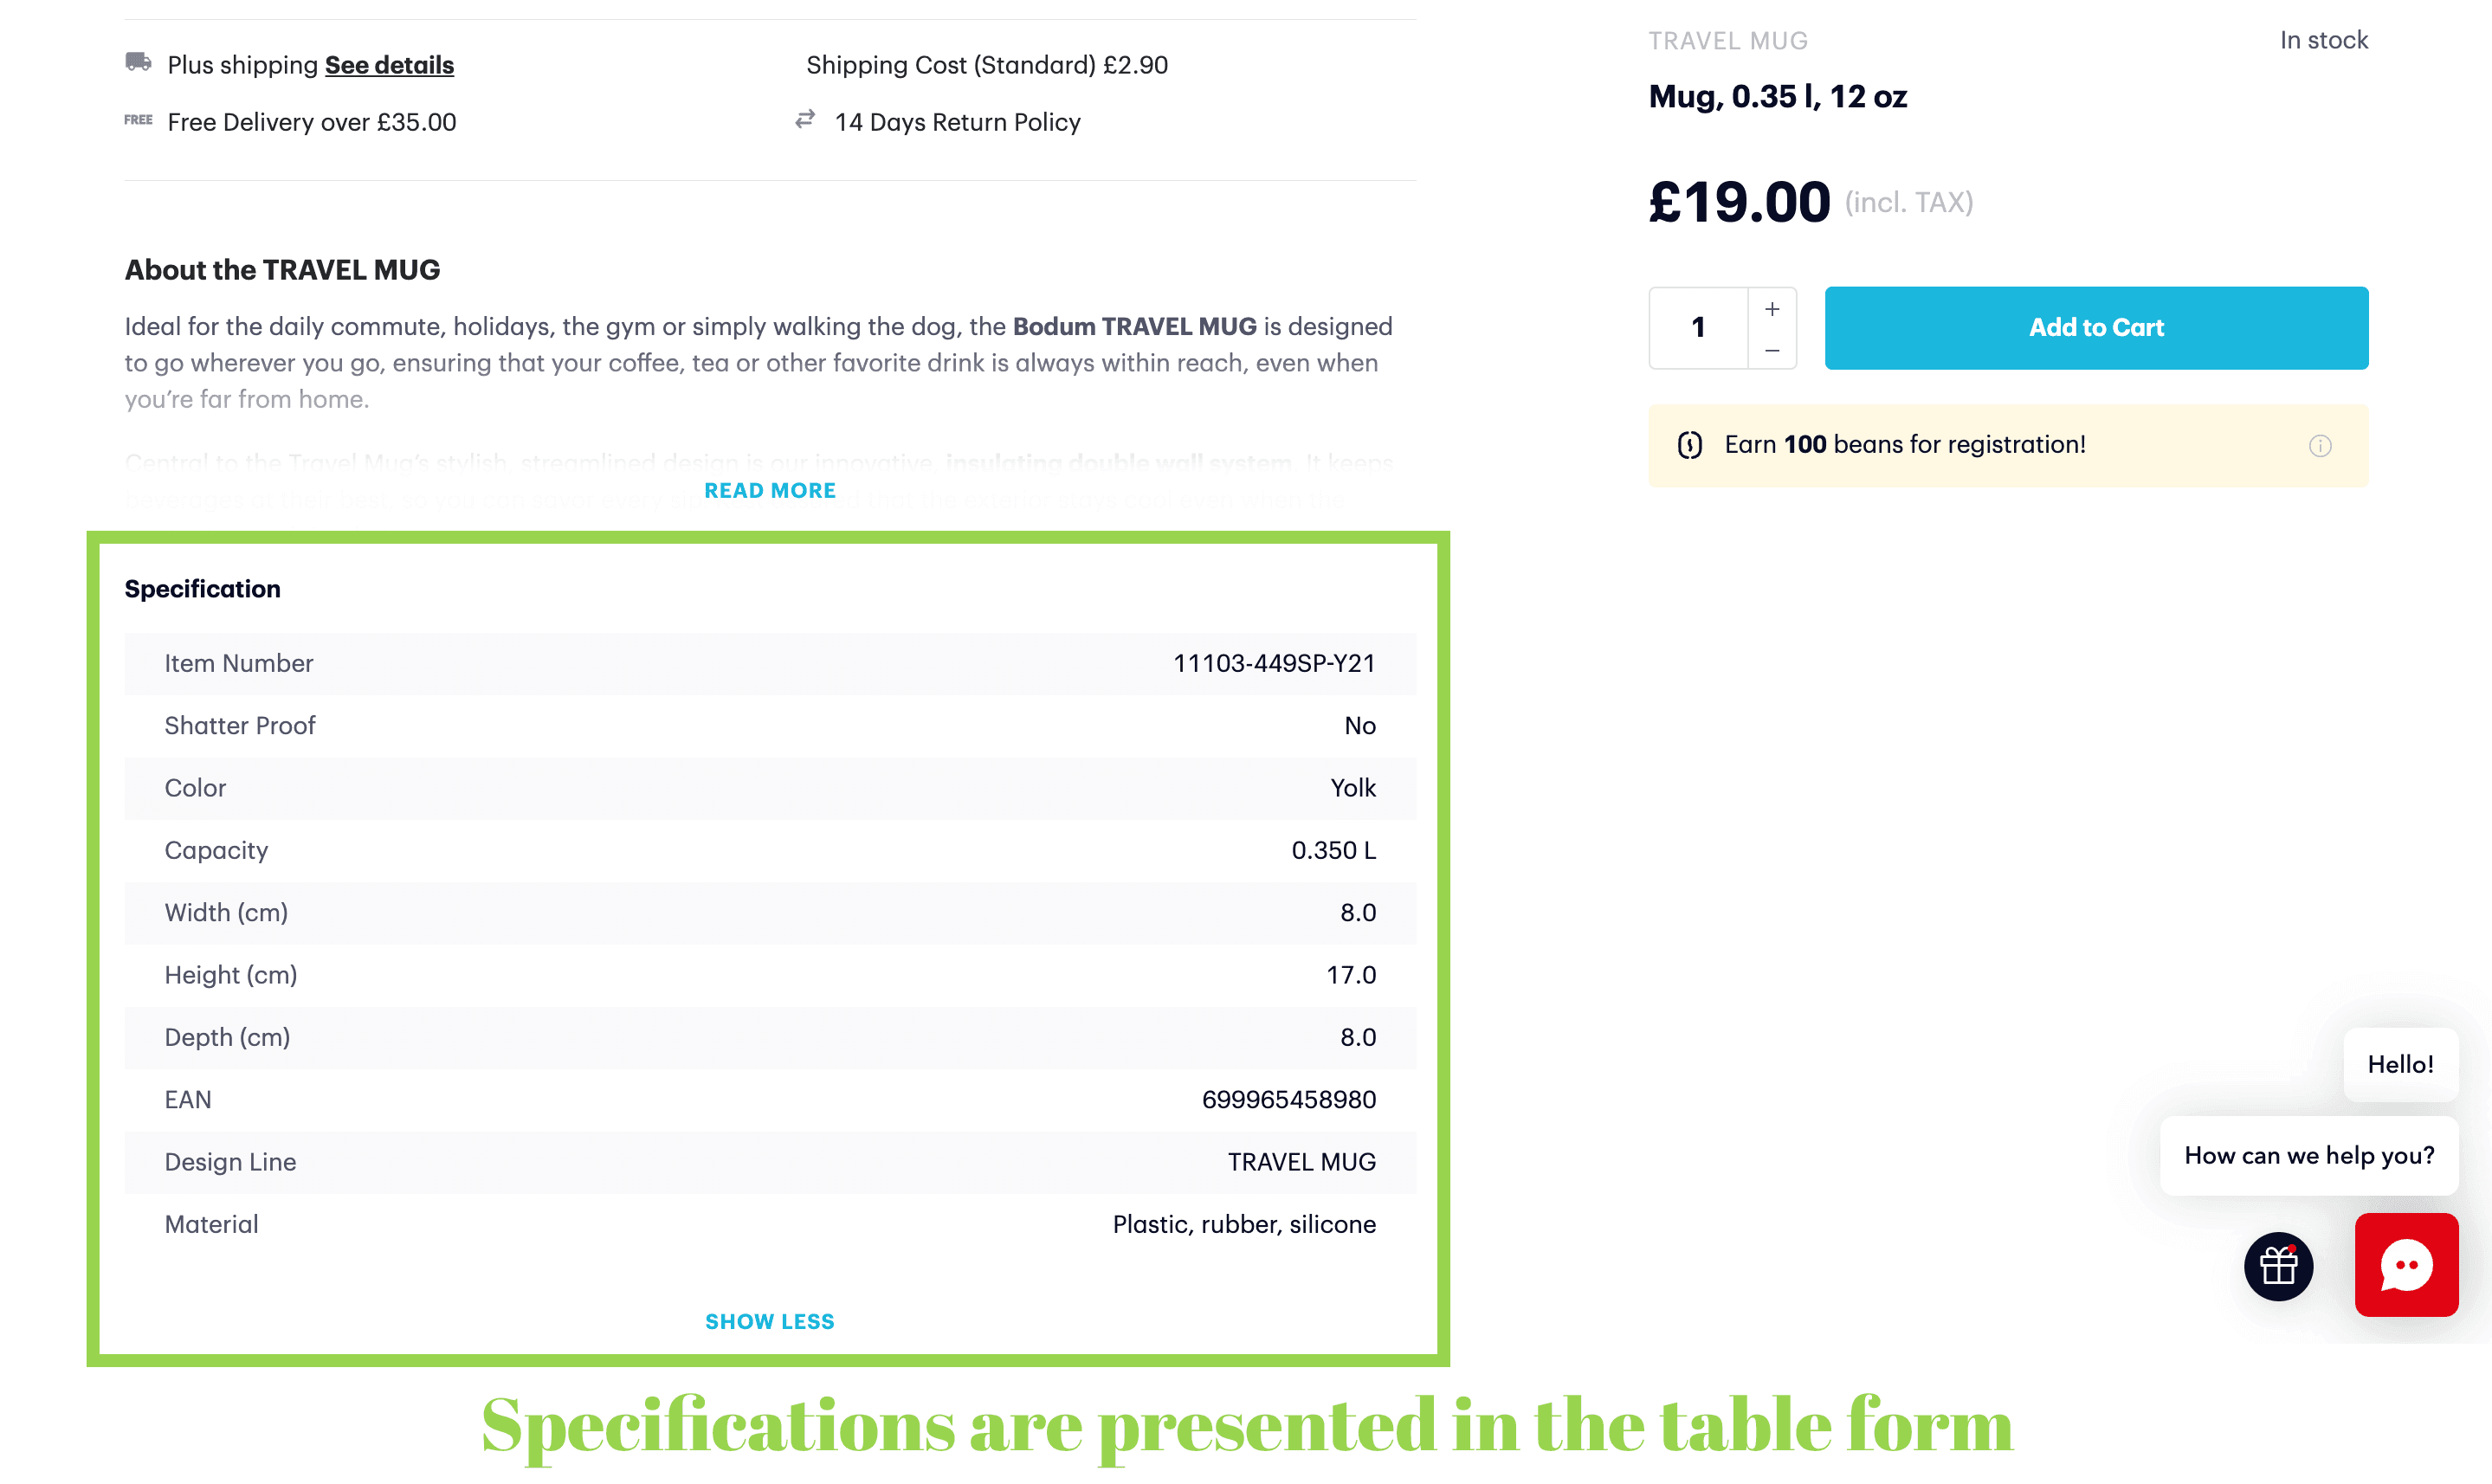 Product details in a table form